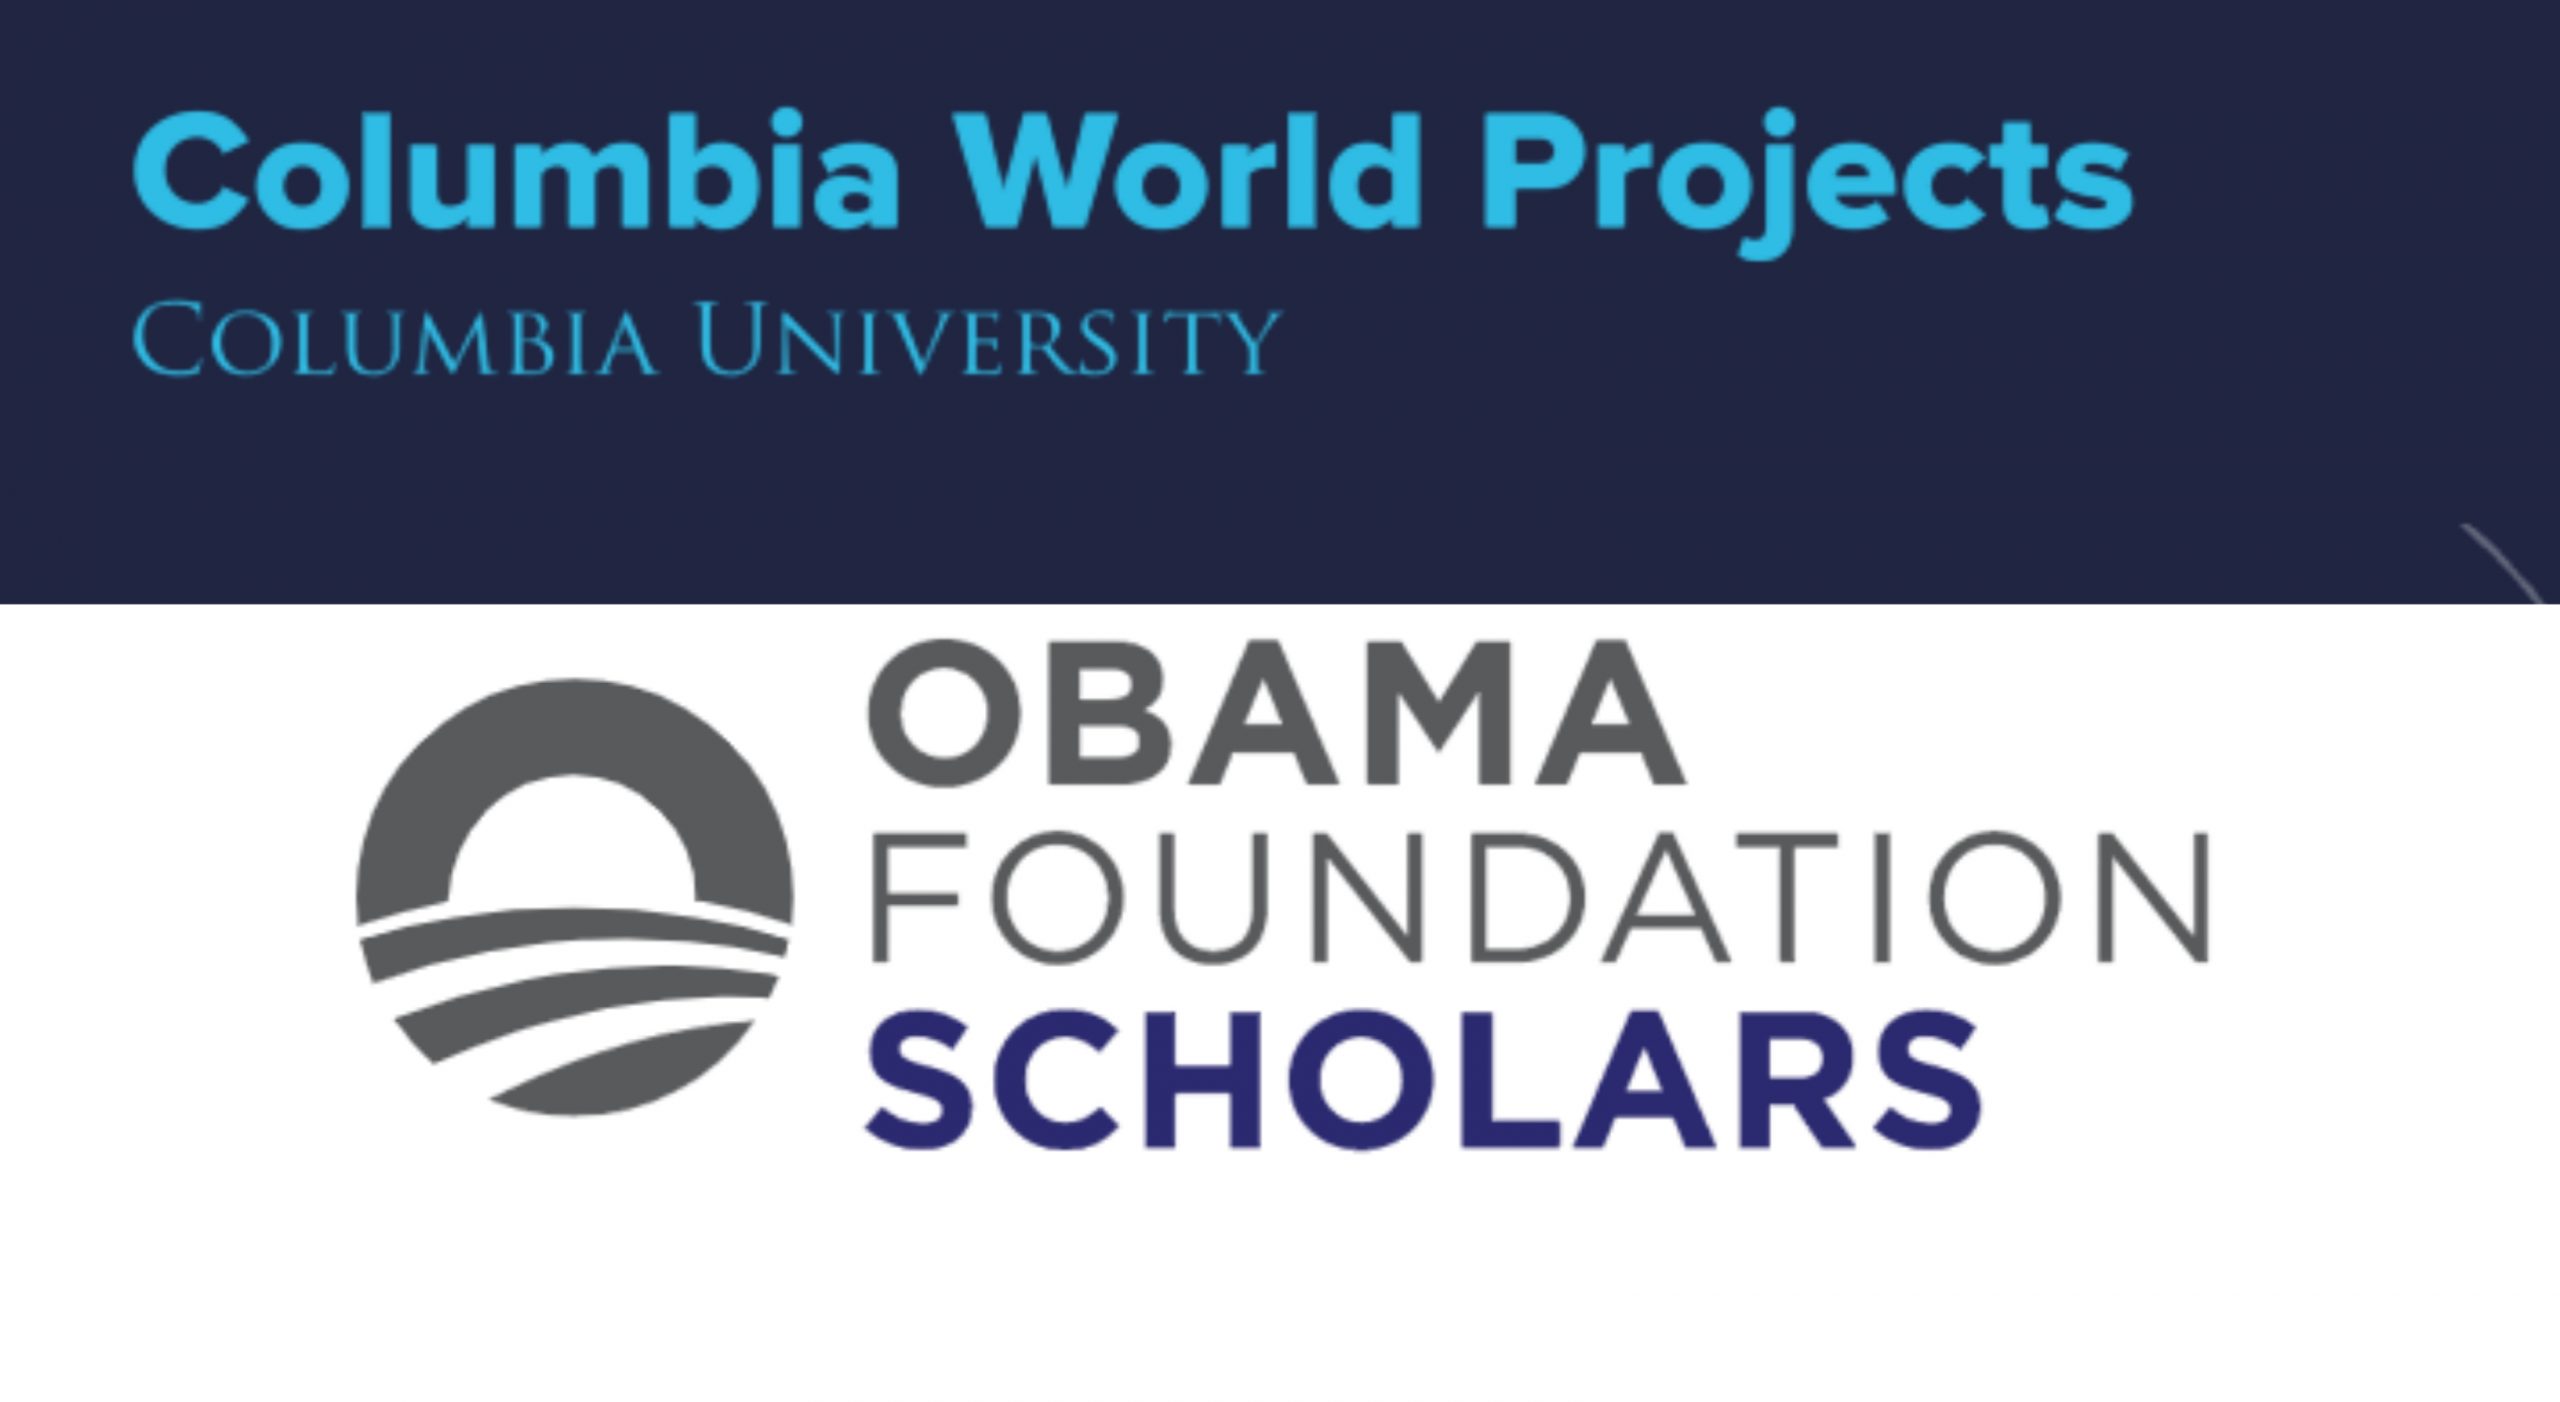 20221005 074520 scaled - Barack Obama Foundation scholarship to study at Columbia and Chicago Universities